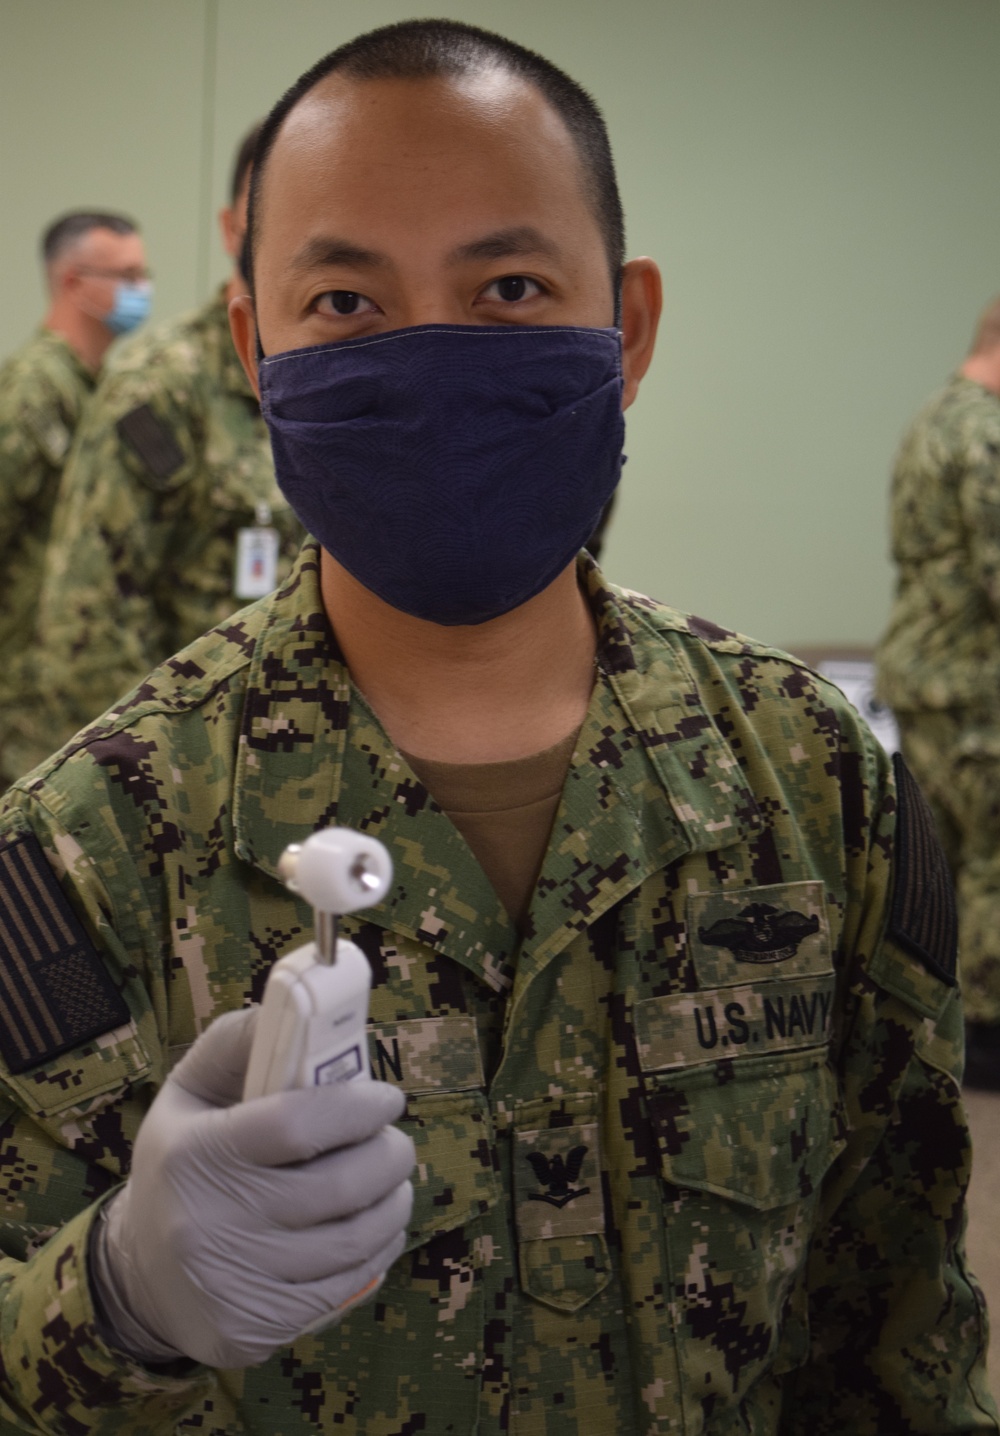 SWABEX by Swabbie - NMRTC Bremerton ensures Operational Readiness and a Medically Ready Force